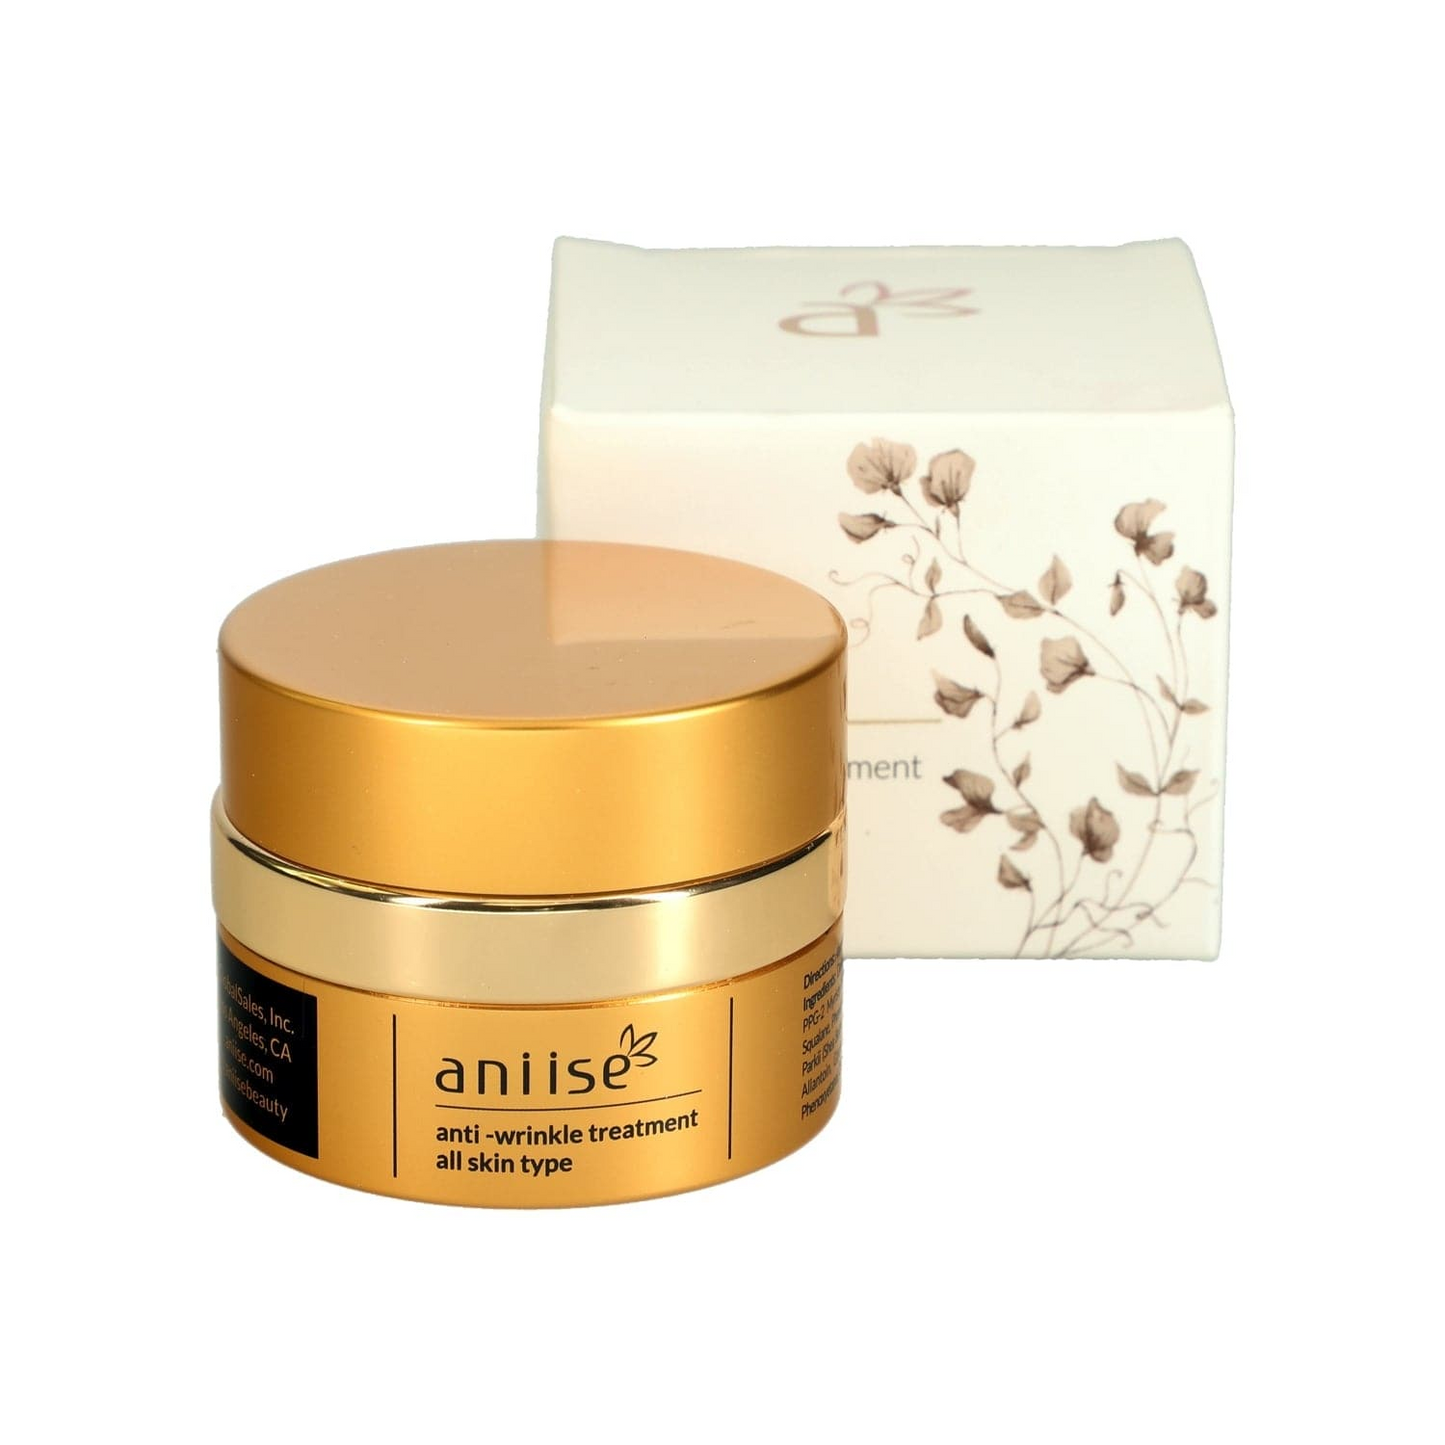 Anti-Wrinkle Treatment Cream for Face and Neck - Reduce Wrinkles and Rejuvenate Skin